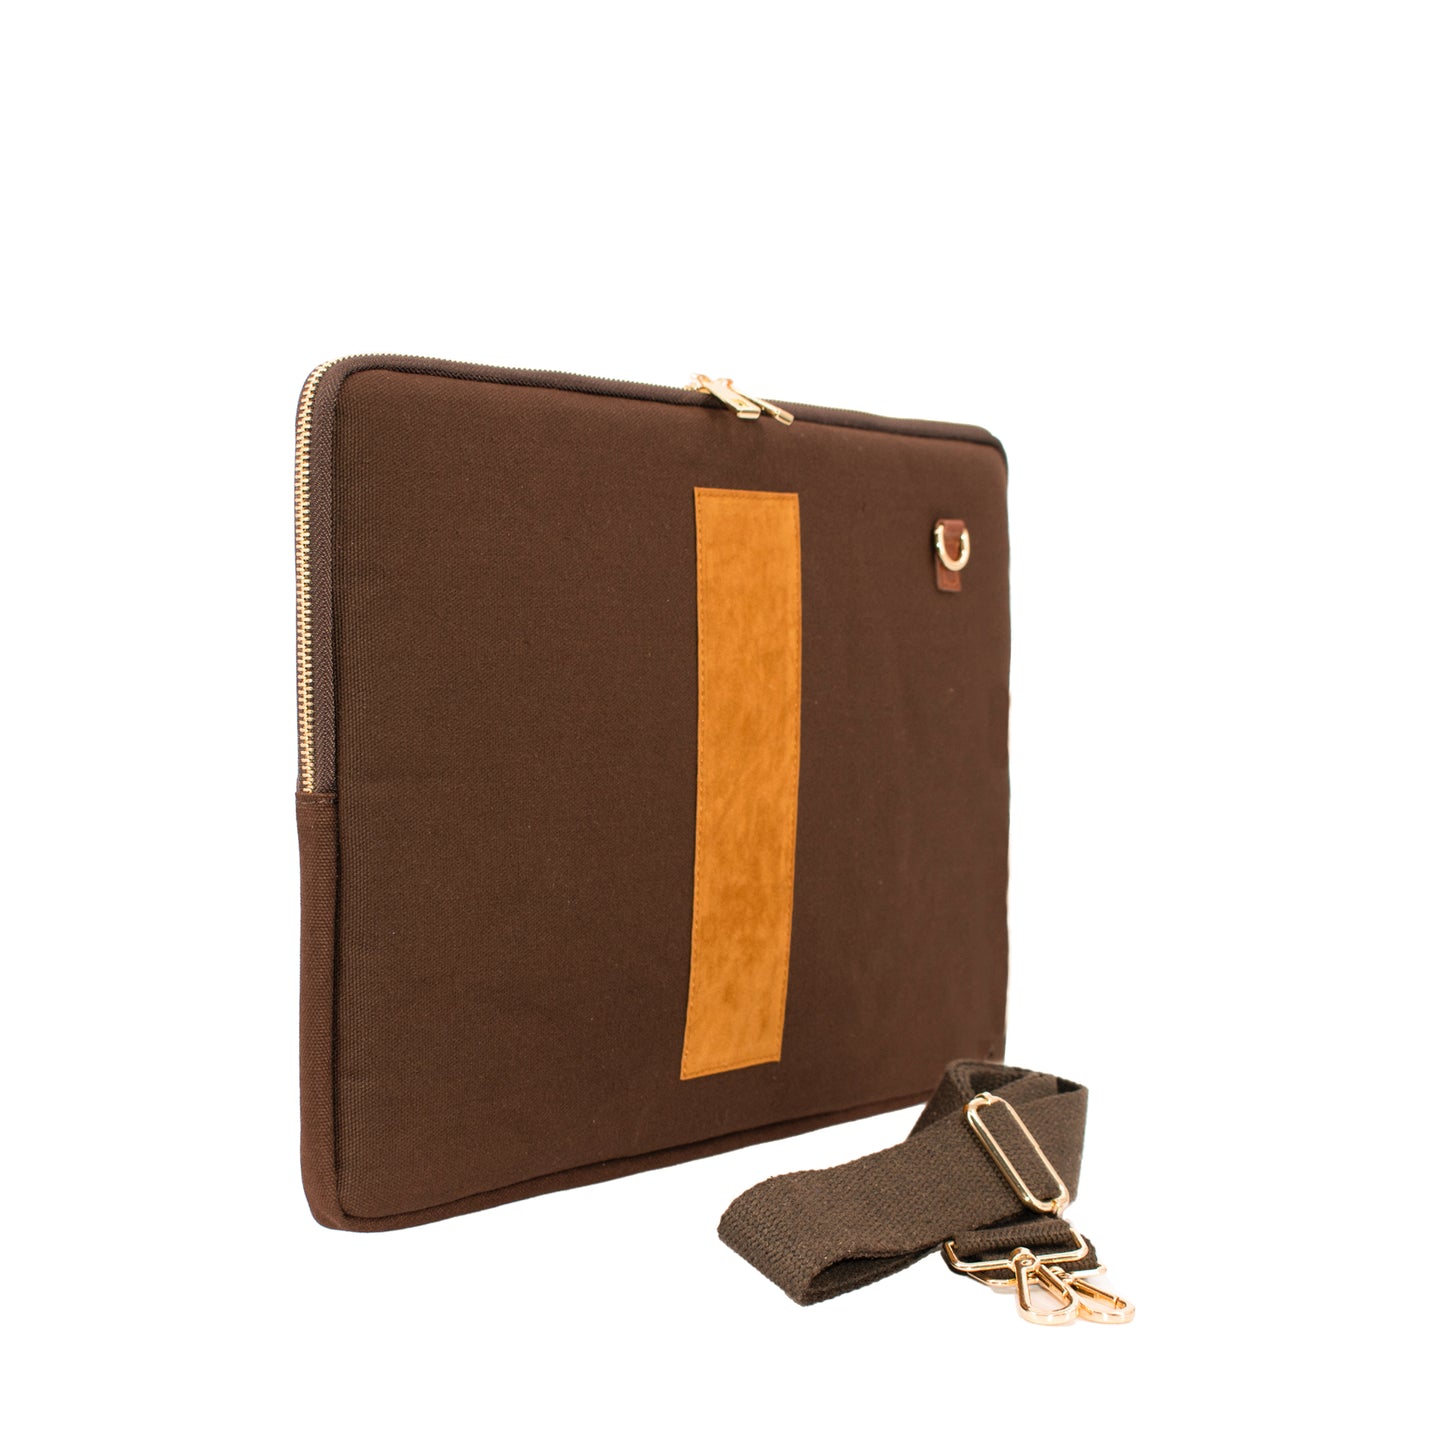 HCANSS BROWN CANVAS LAPTOP SLEEVE